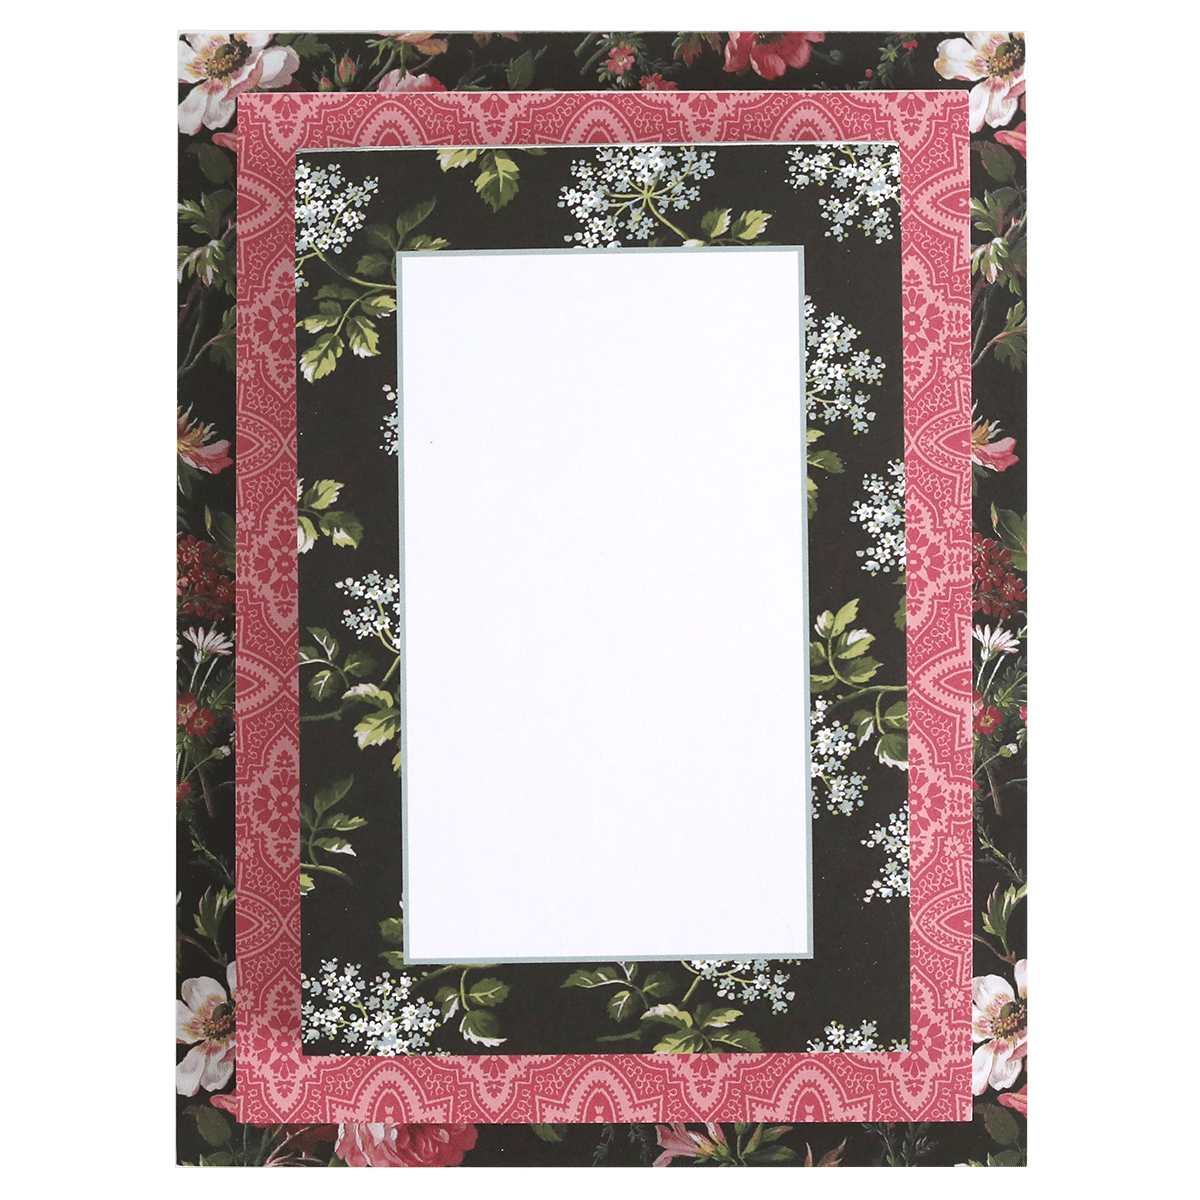 a picture frame with flowers on a black background.